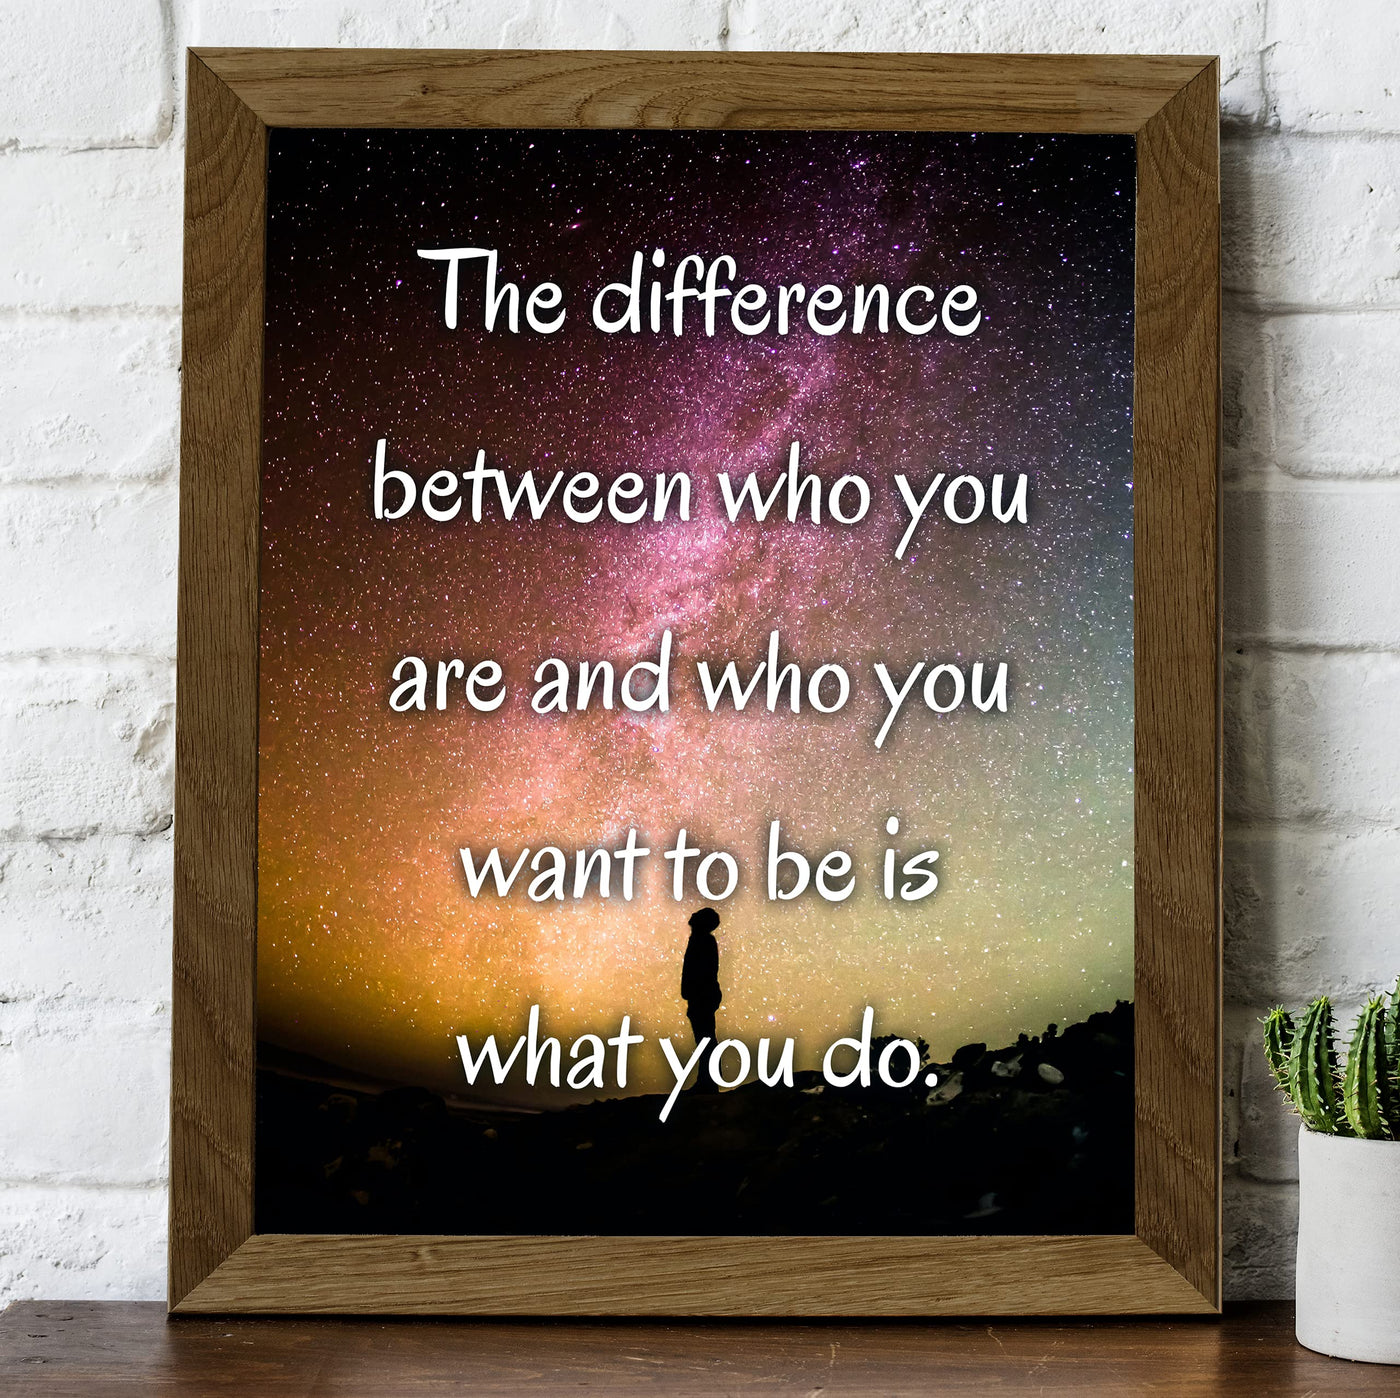 Difference Between Who You Are & Want to Be Is What You Do-Motivational Quotes Wall Art -8x10" Starry Night Print-Ready to Frame. Inspirational Decor for Home-Office. Perfect Classroom Sign!